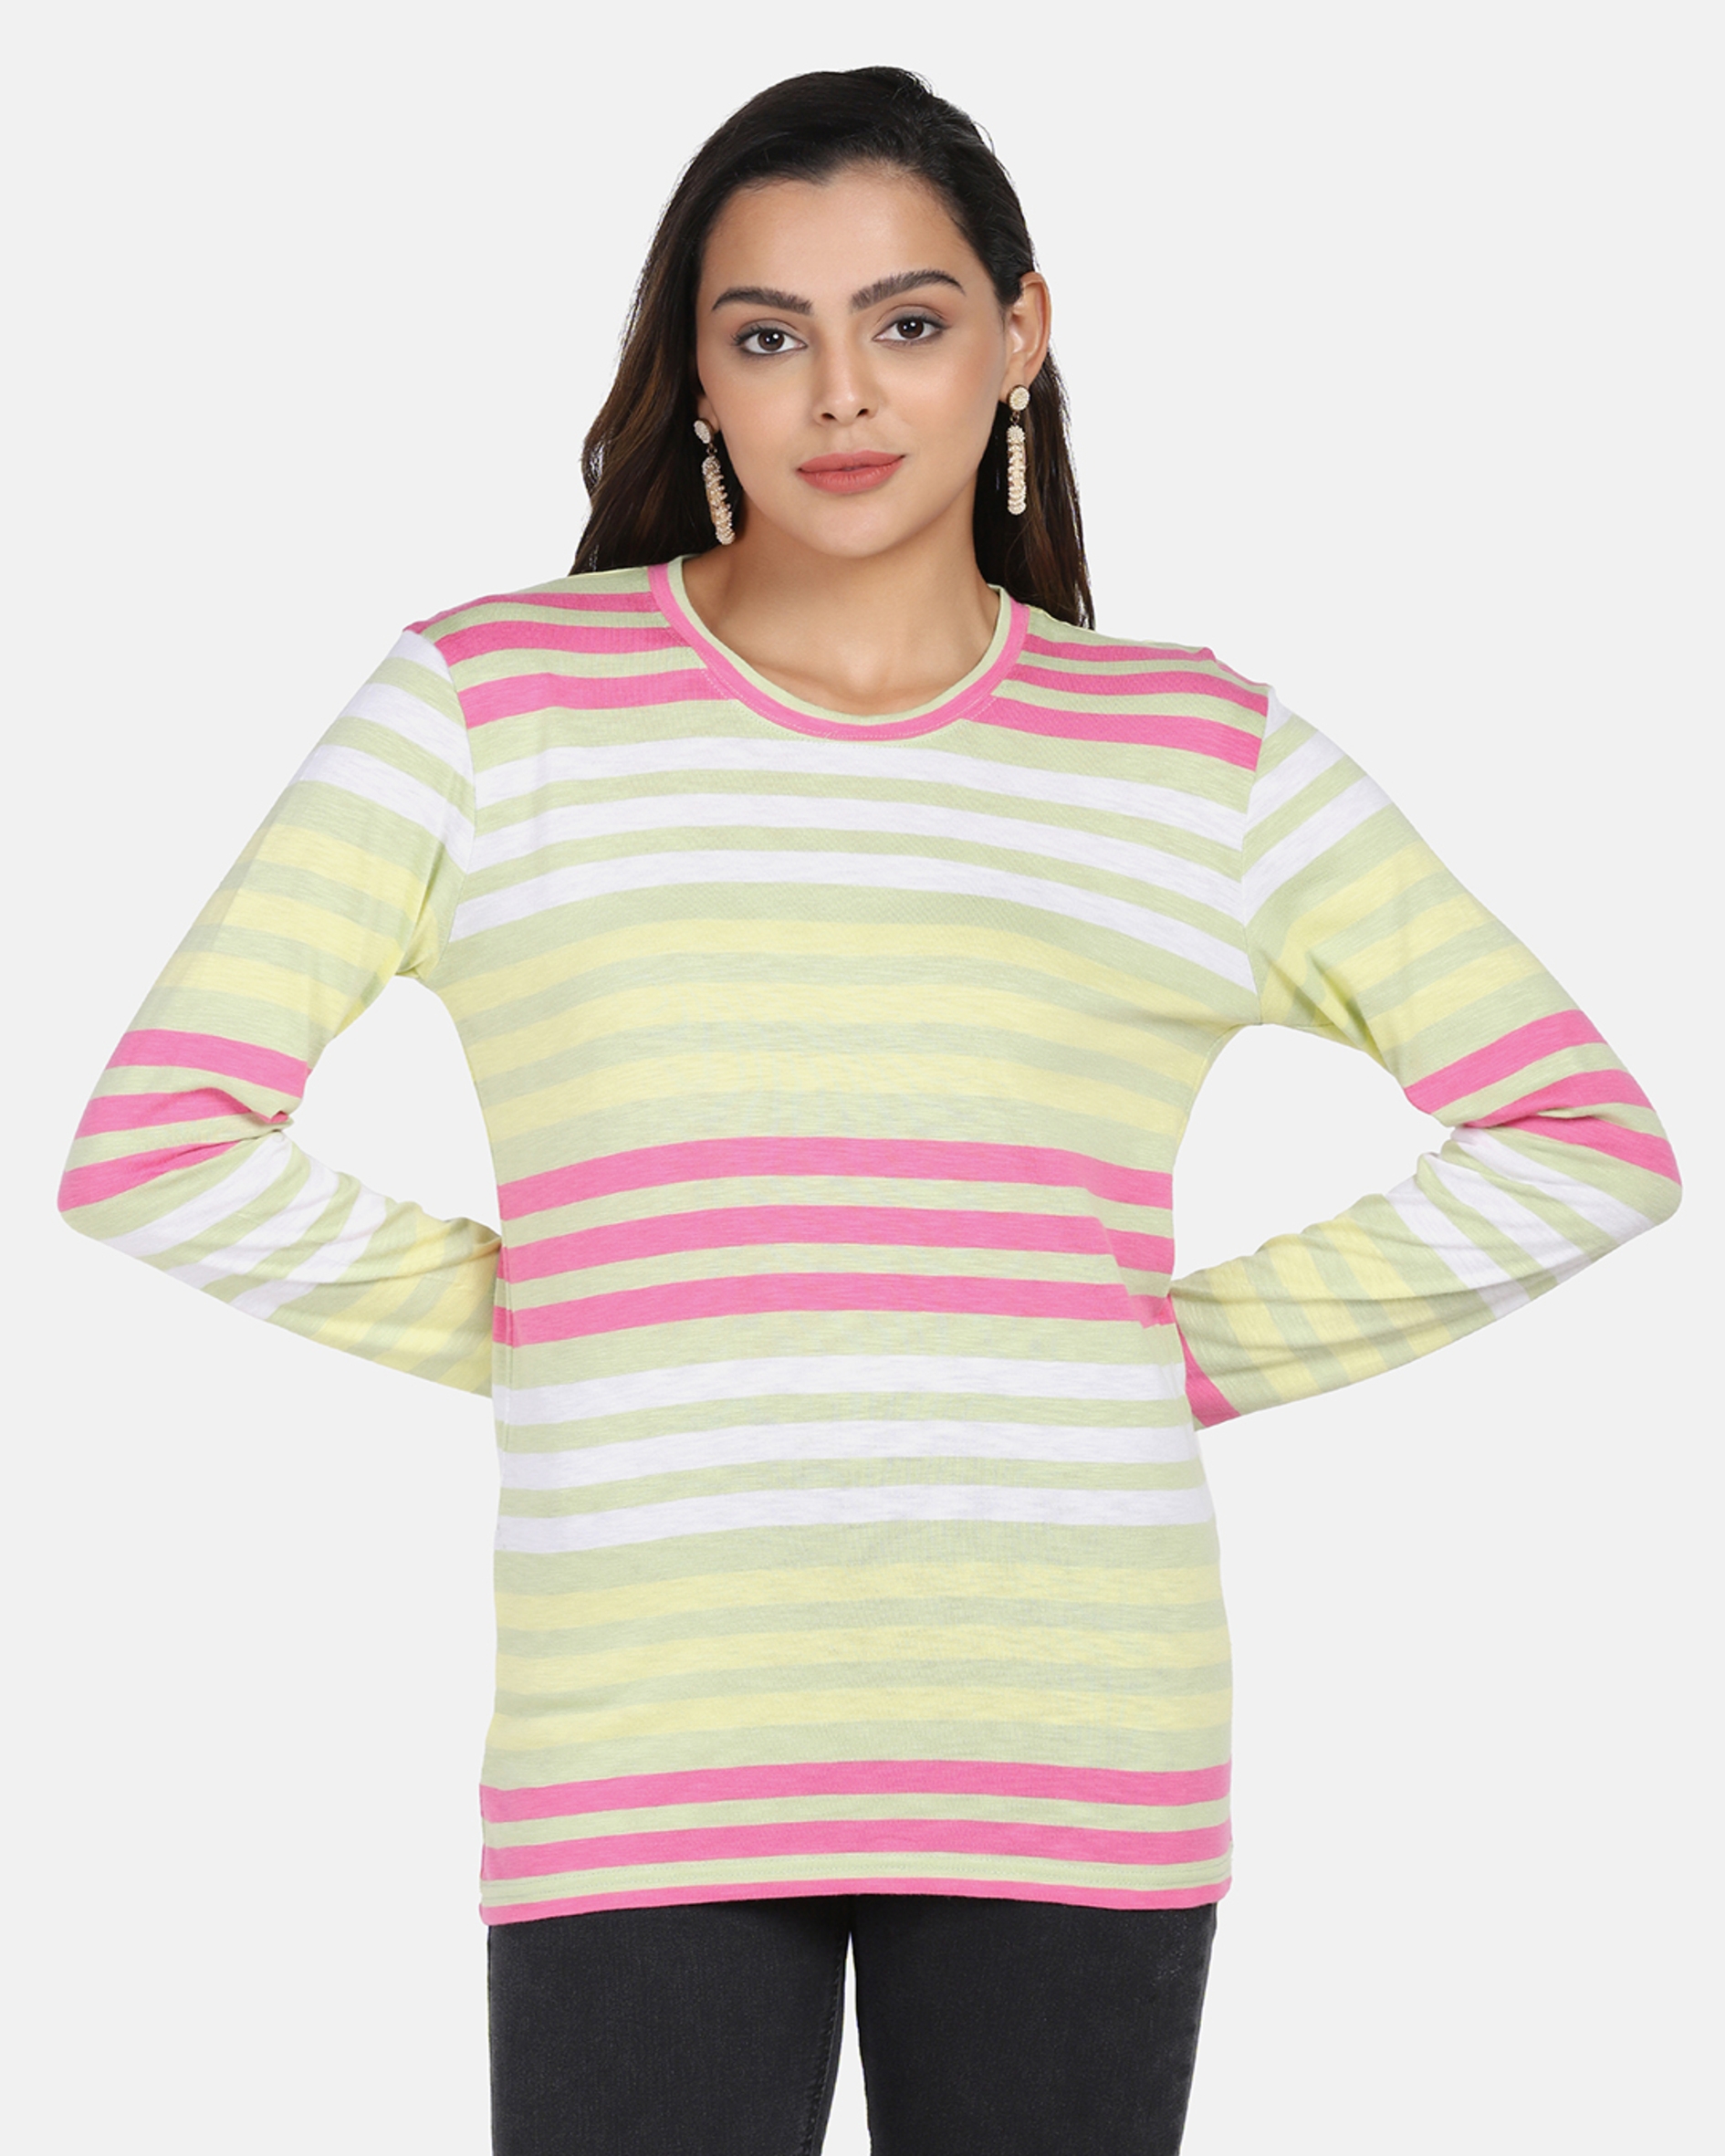 Full Sleeves Pink & Green Striped T Shirt